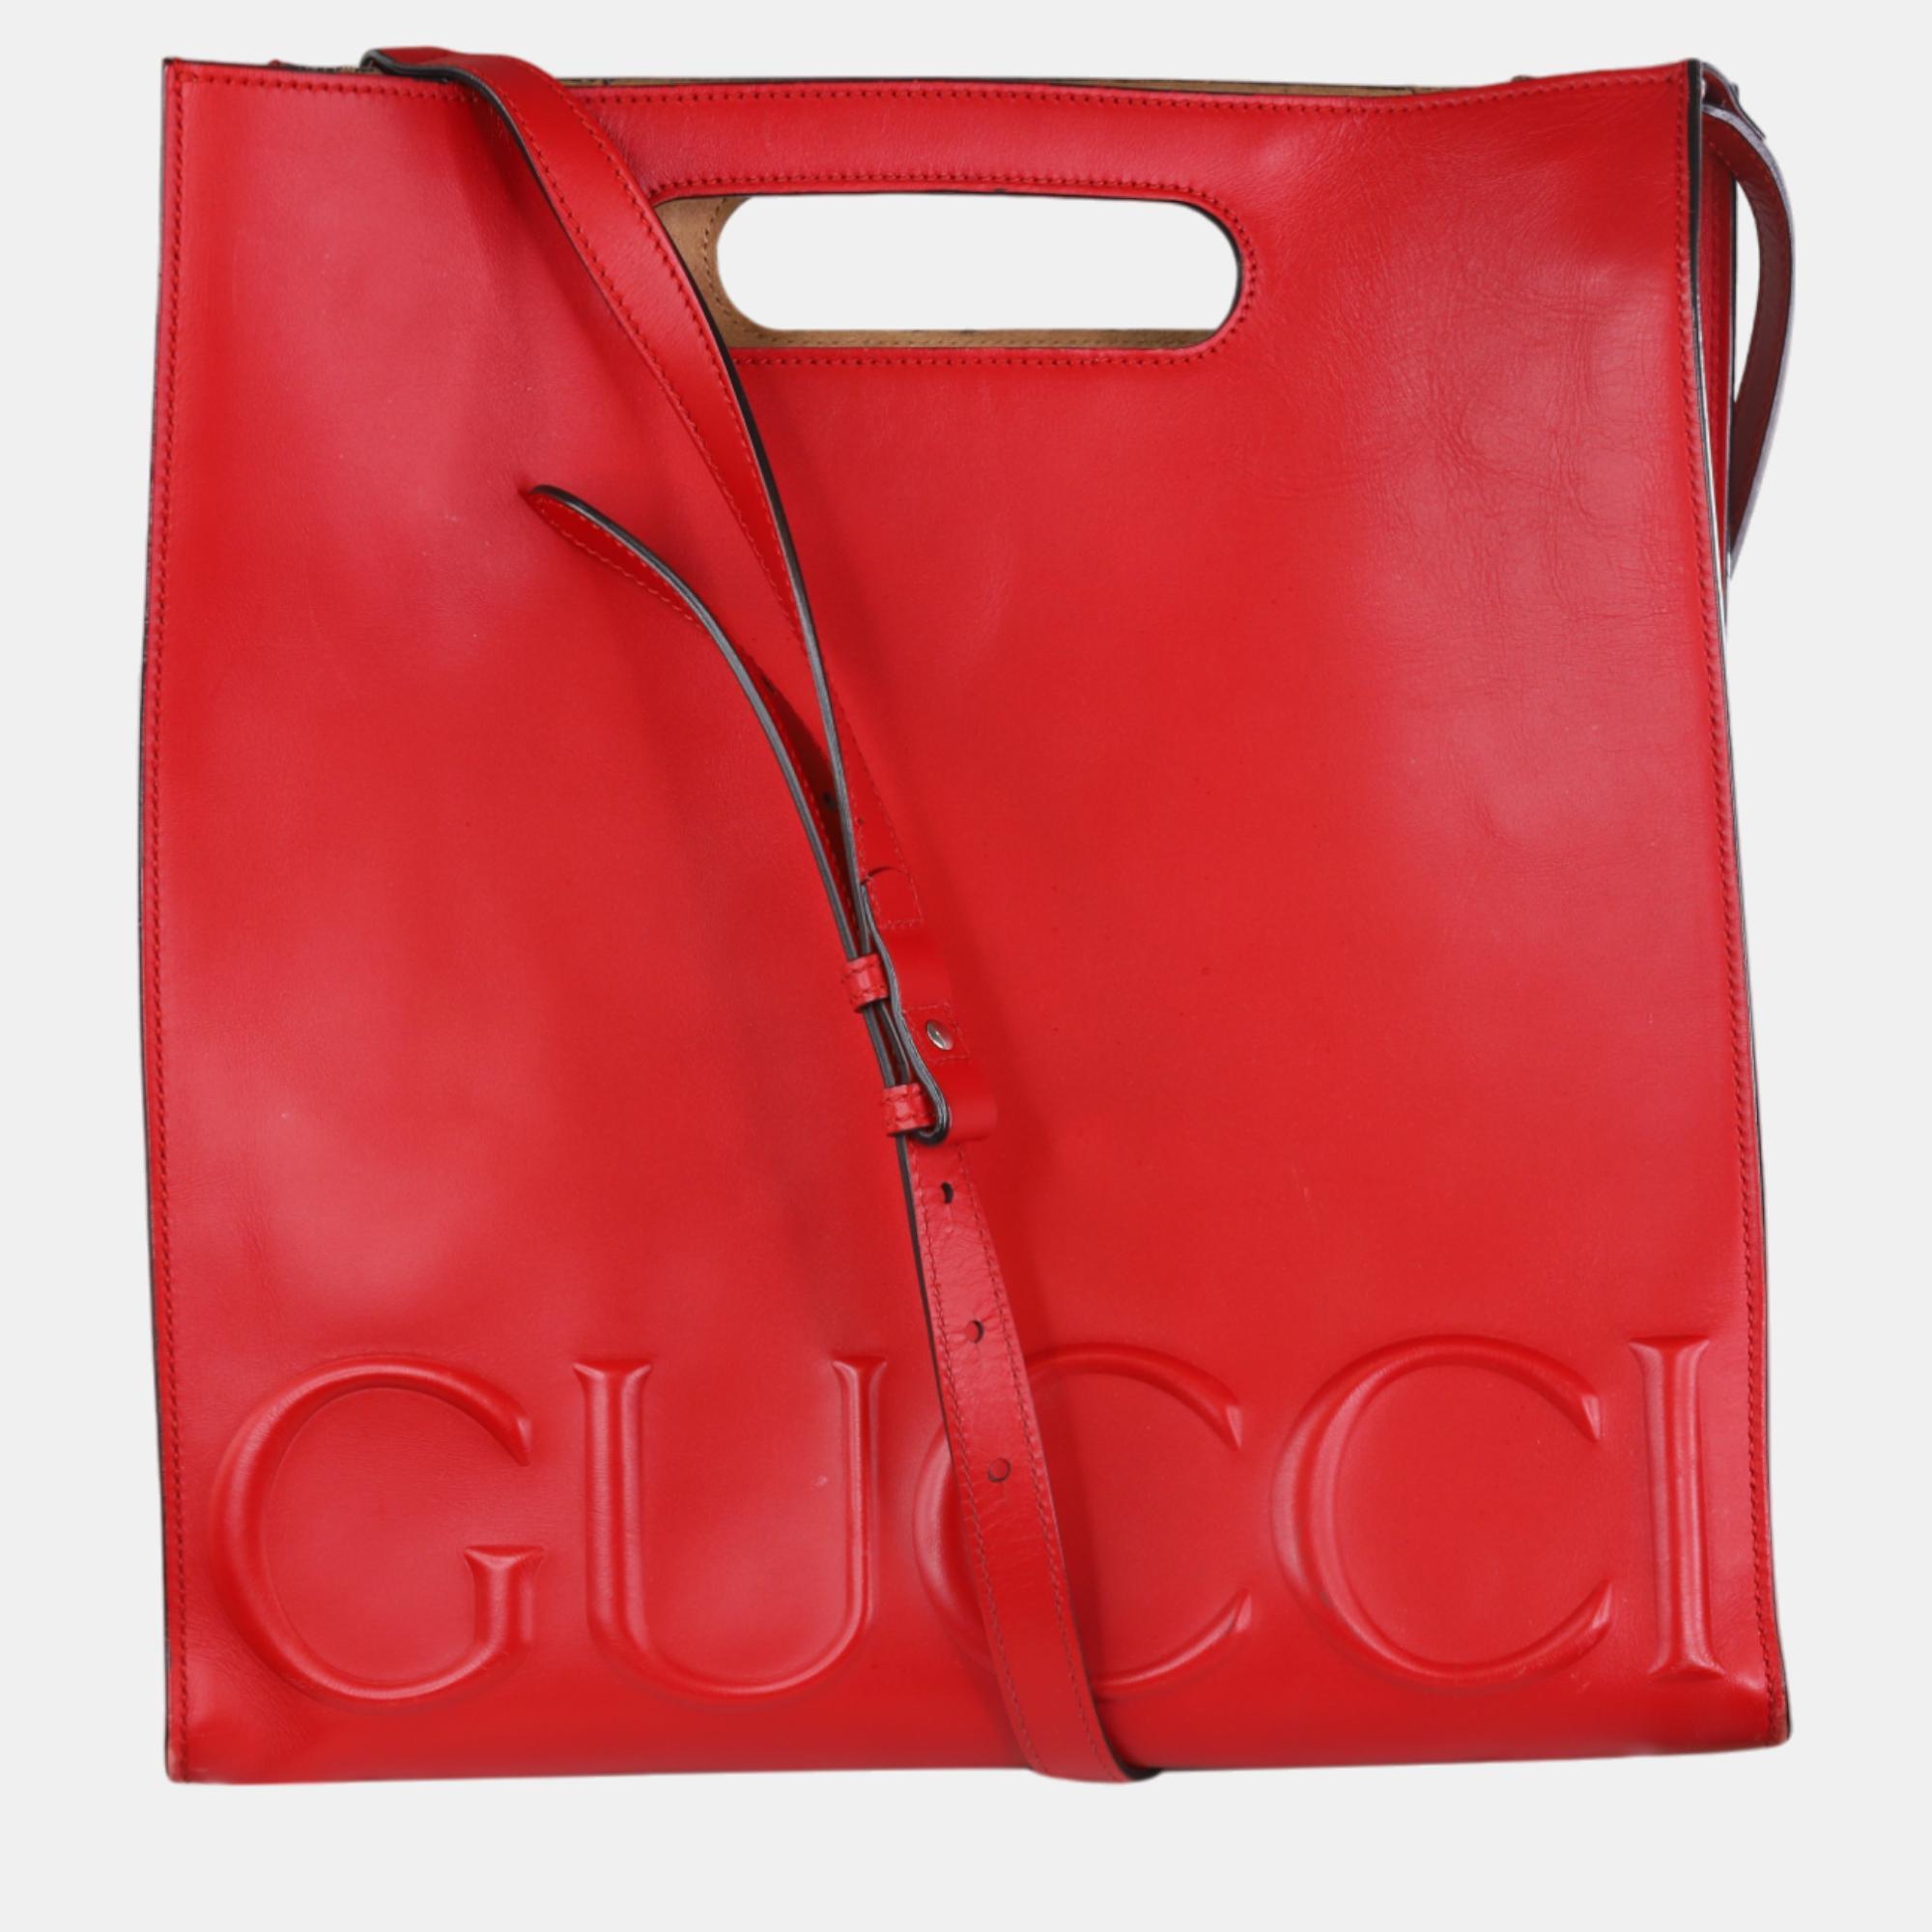 Gucci red leather xl linear tote bag